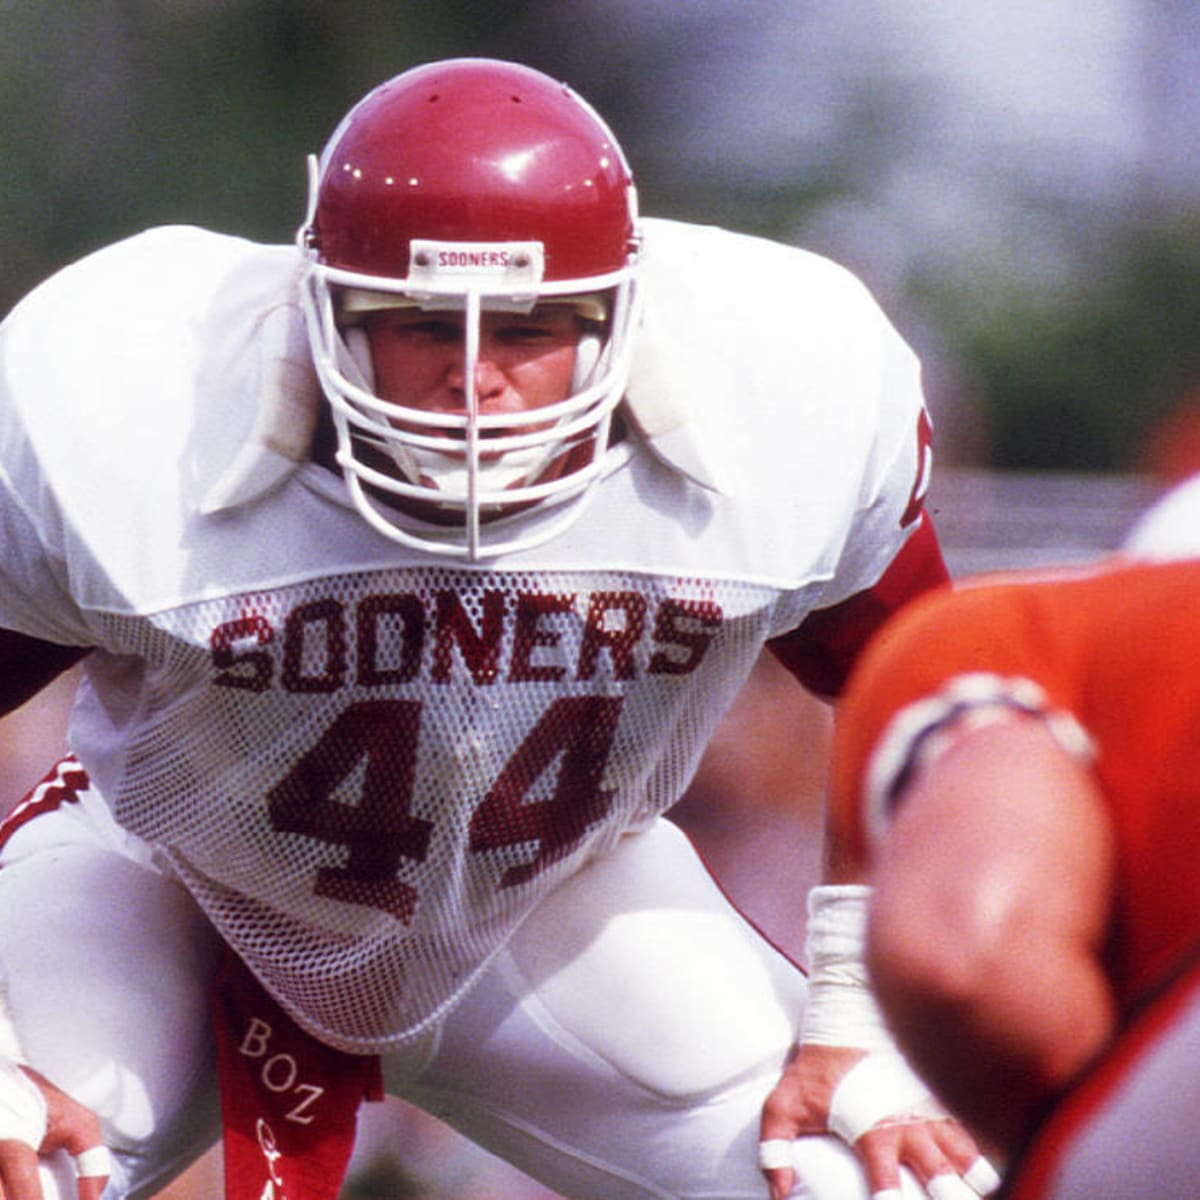 Six Sooners Named to All-Time Top 100 - University of Oklahoma